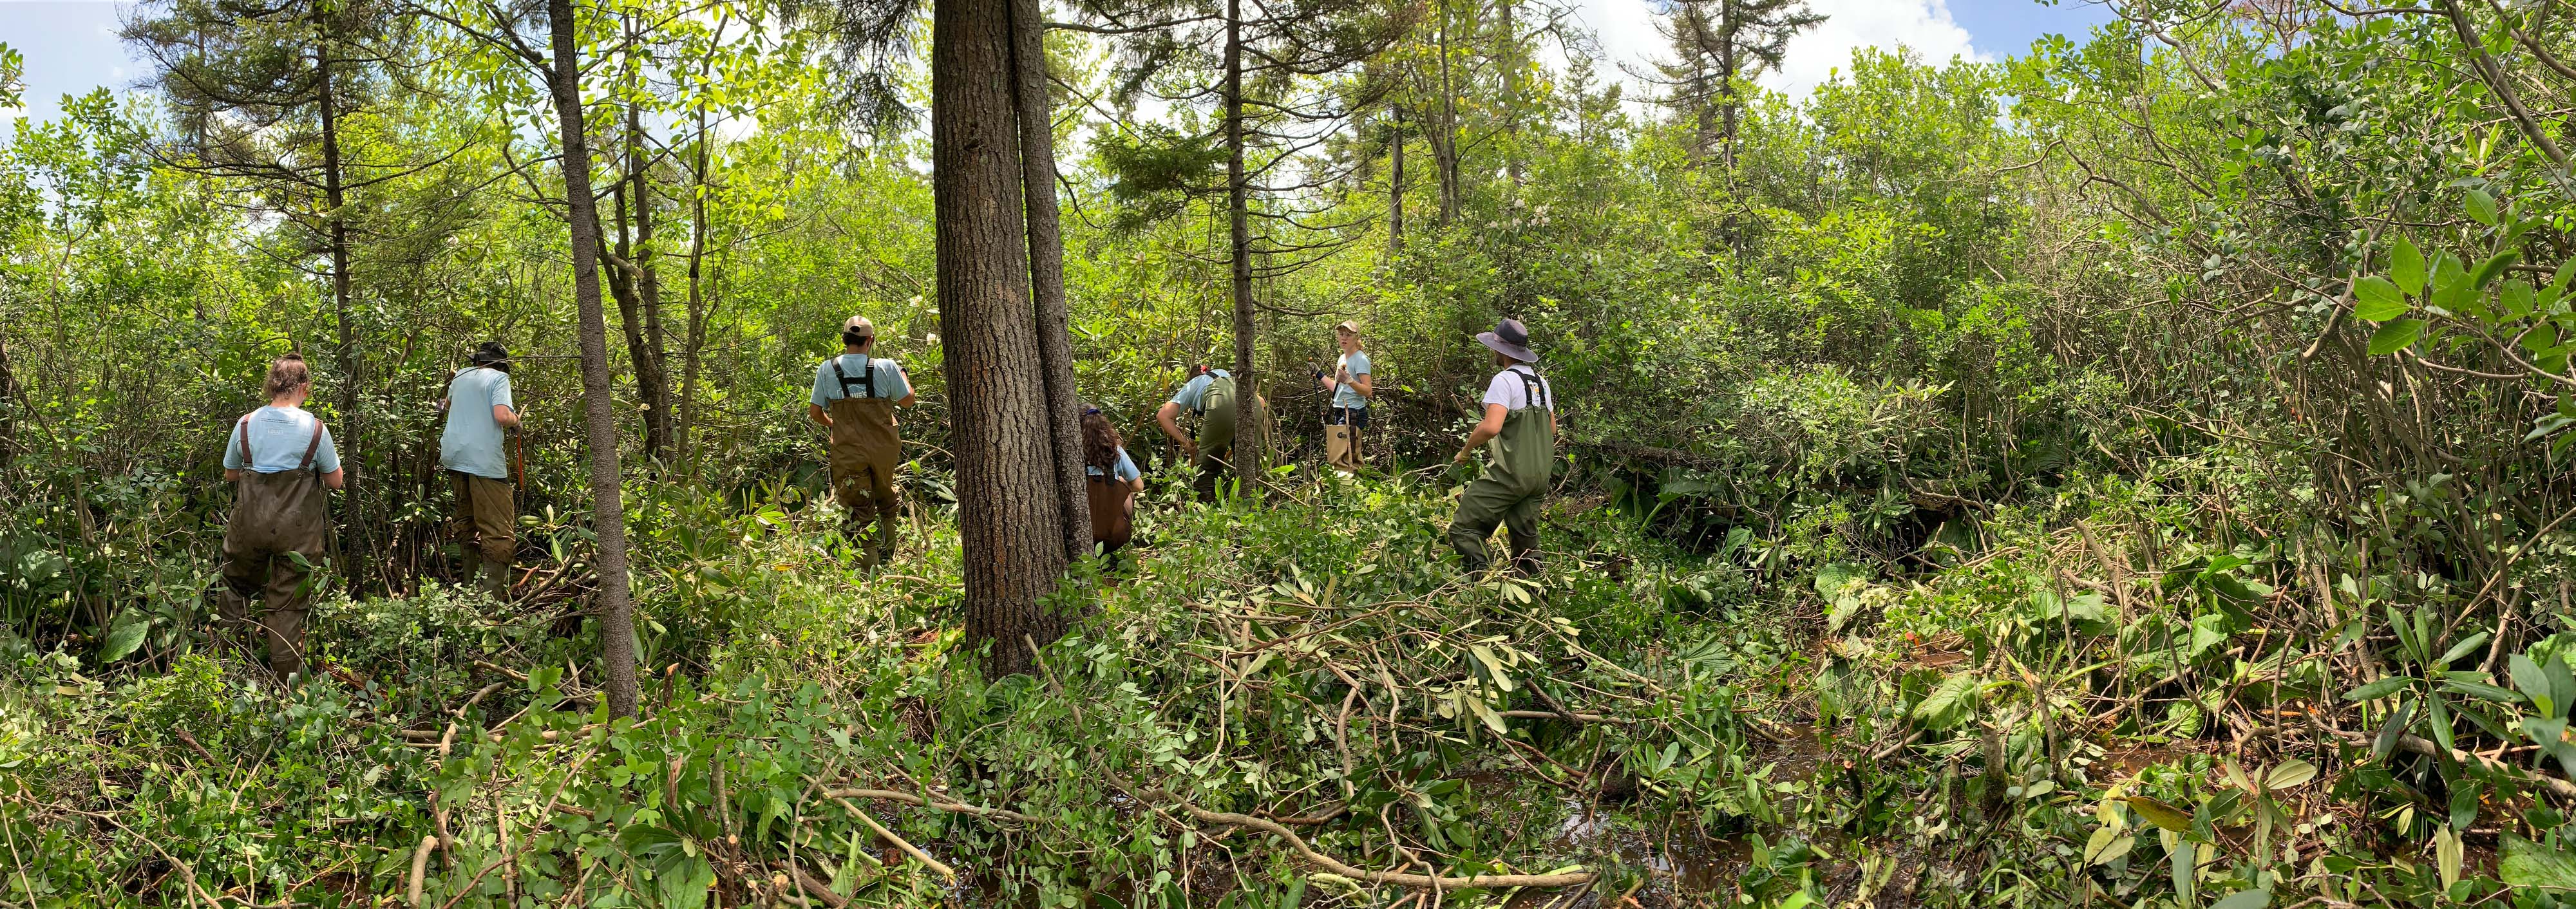 A group of people clear brush from the base of a tree.